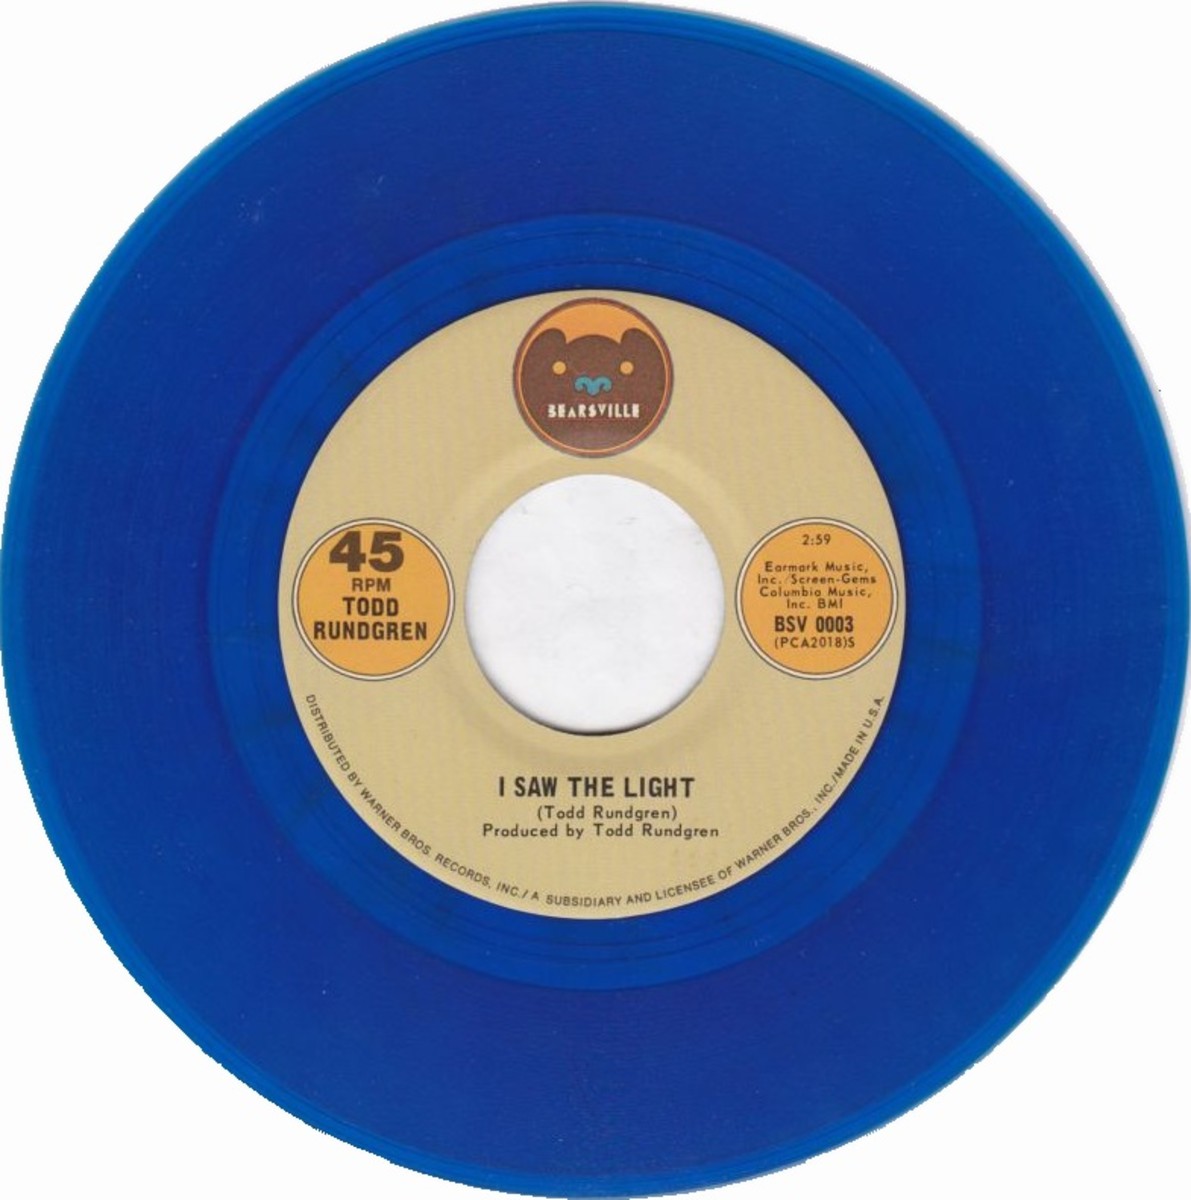 A classic blue vinyl variant of "I Saw the Light." All images courtesy of 45cat.com